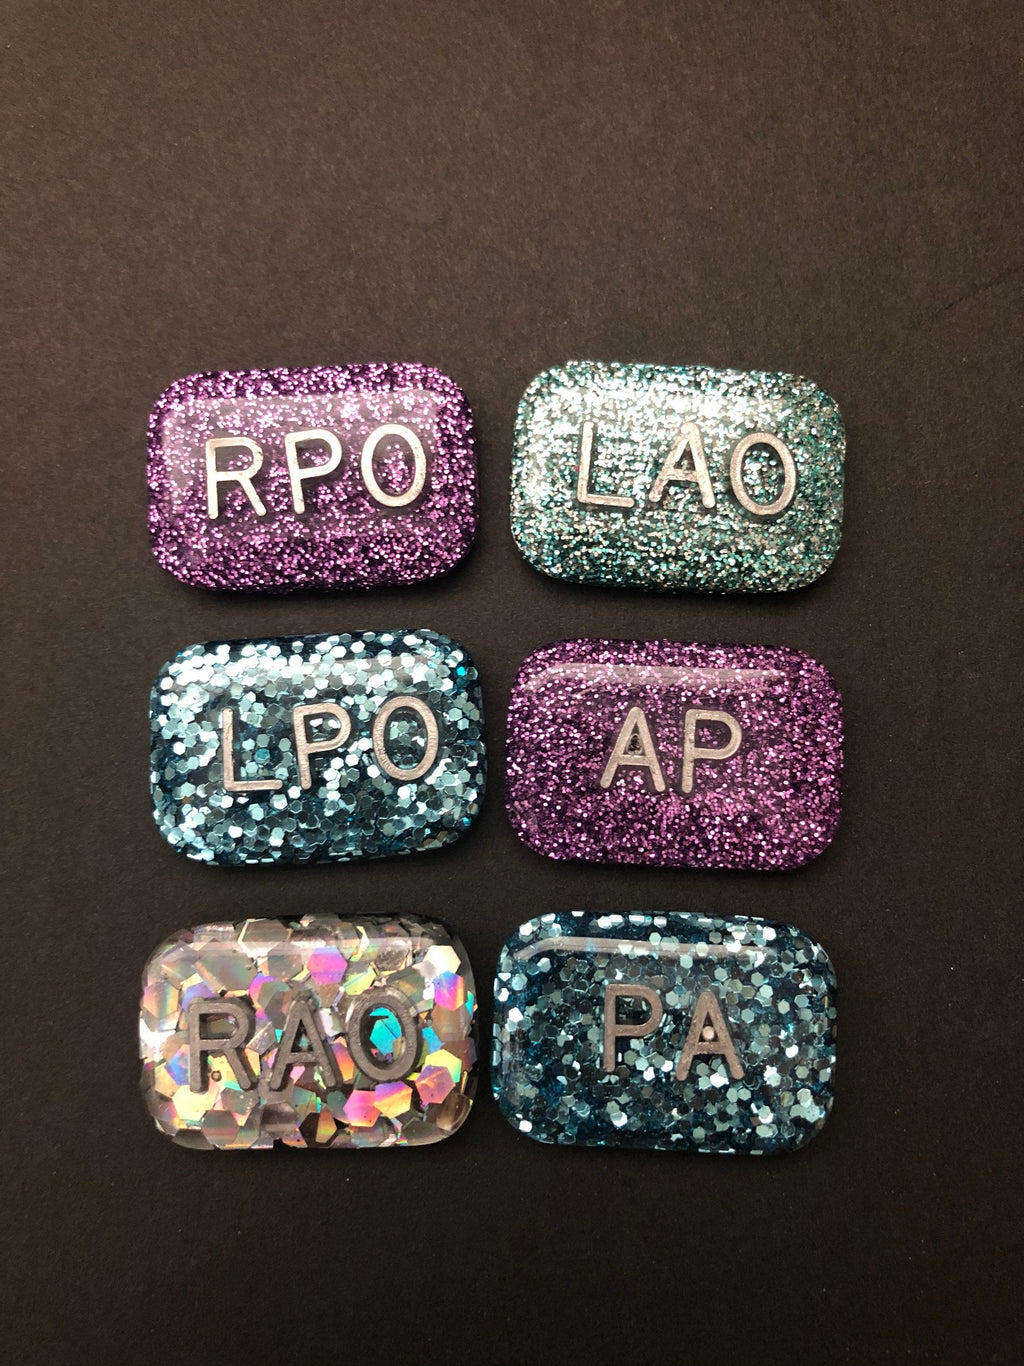 Rao Rpo Lao Lpo, Ap, Pa, Positional Xray Markers, Rectangle, Glitter, X-ray Markers, Position Indicator